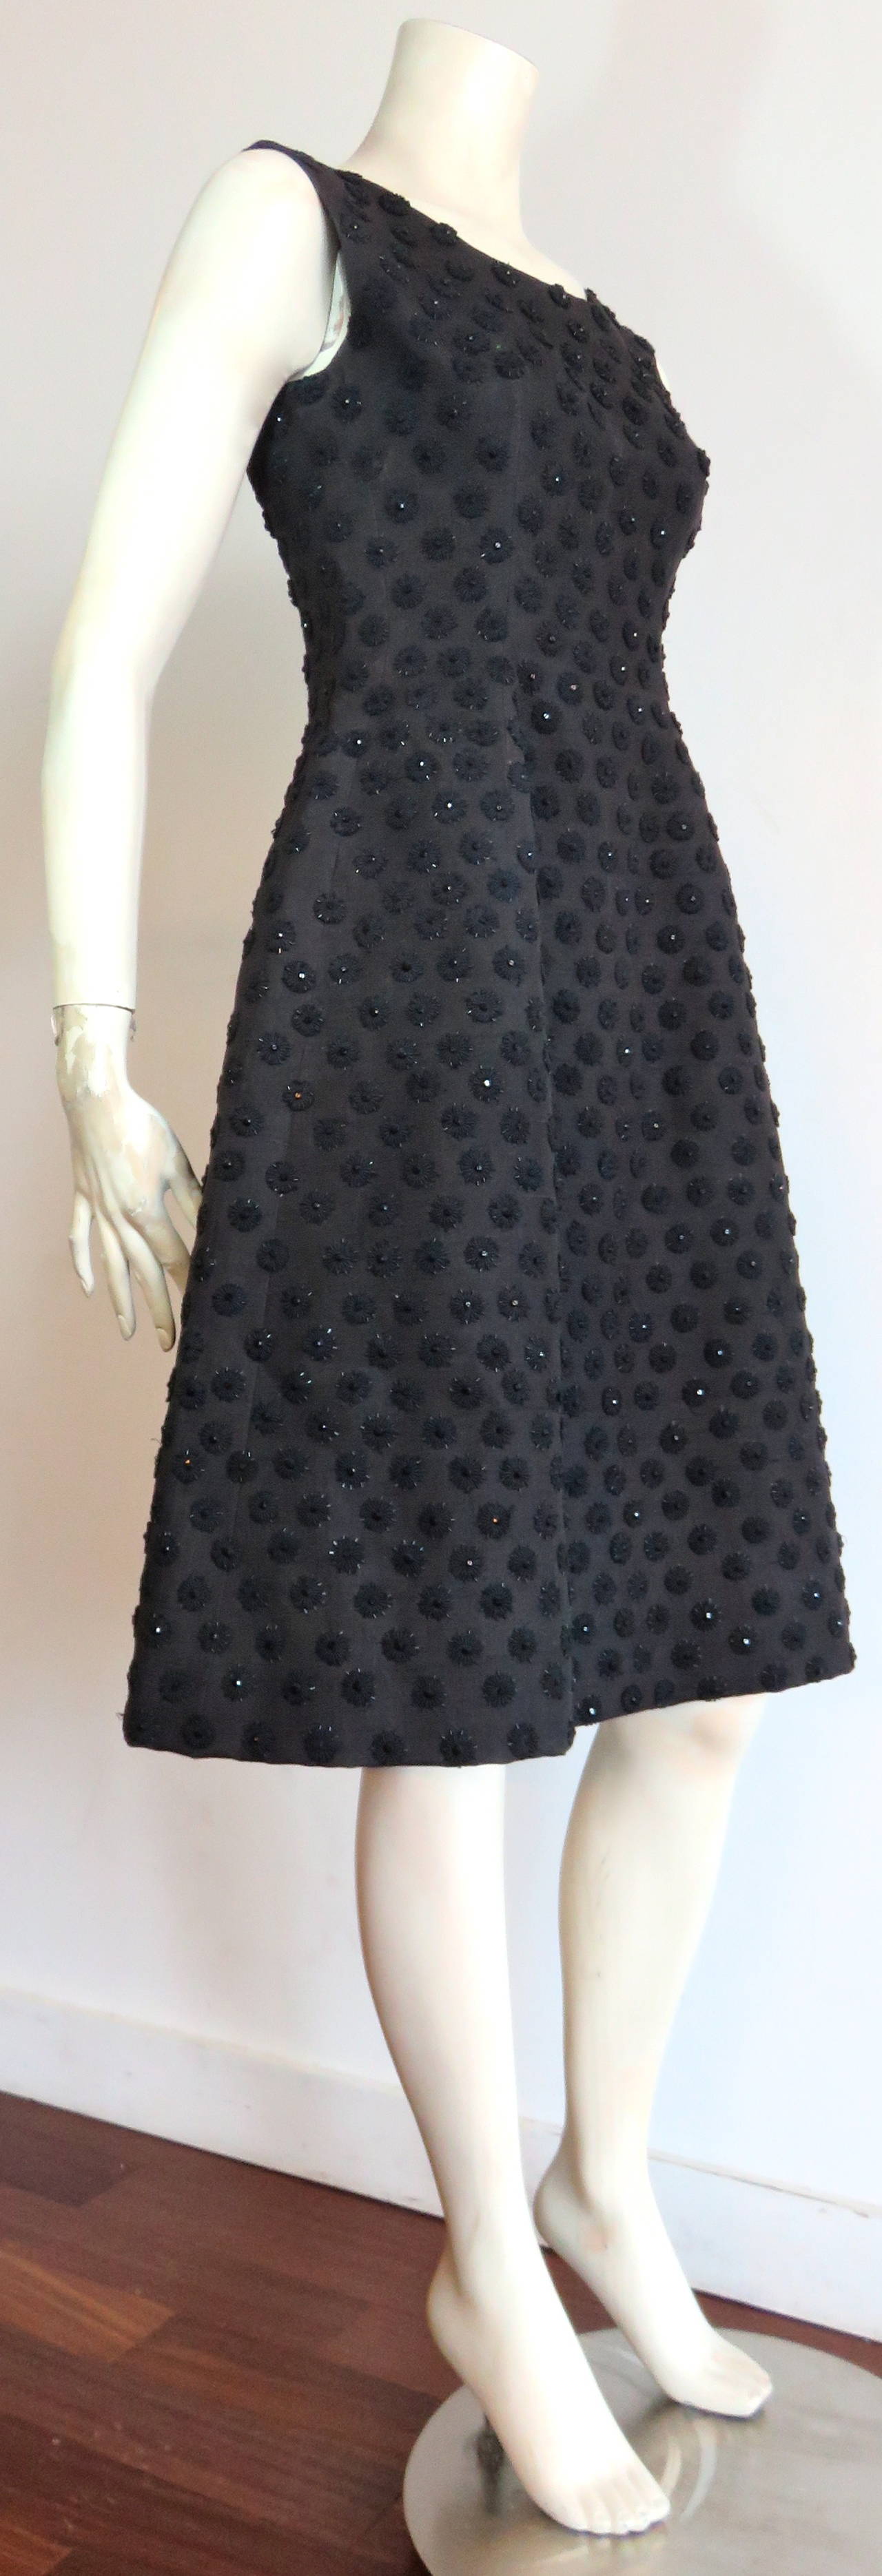 Women's 1961 GIVENCHY Haute Couture embellished cocktail dress -  Met Museum piece